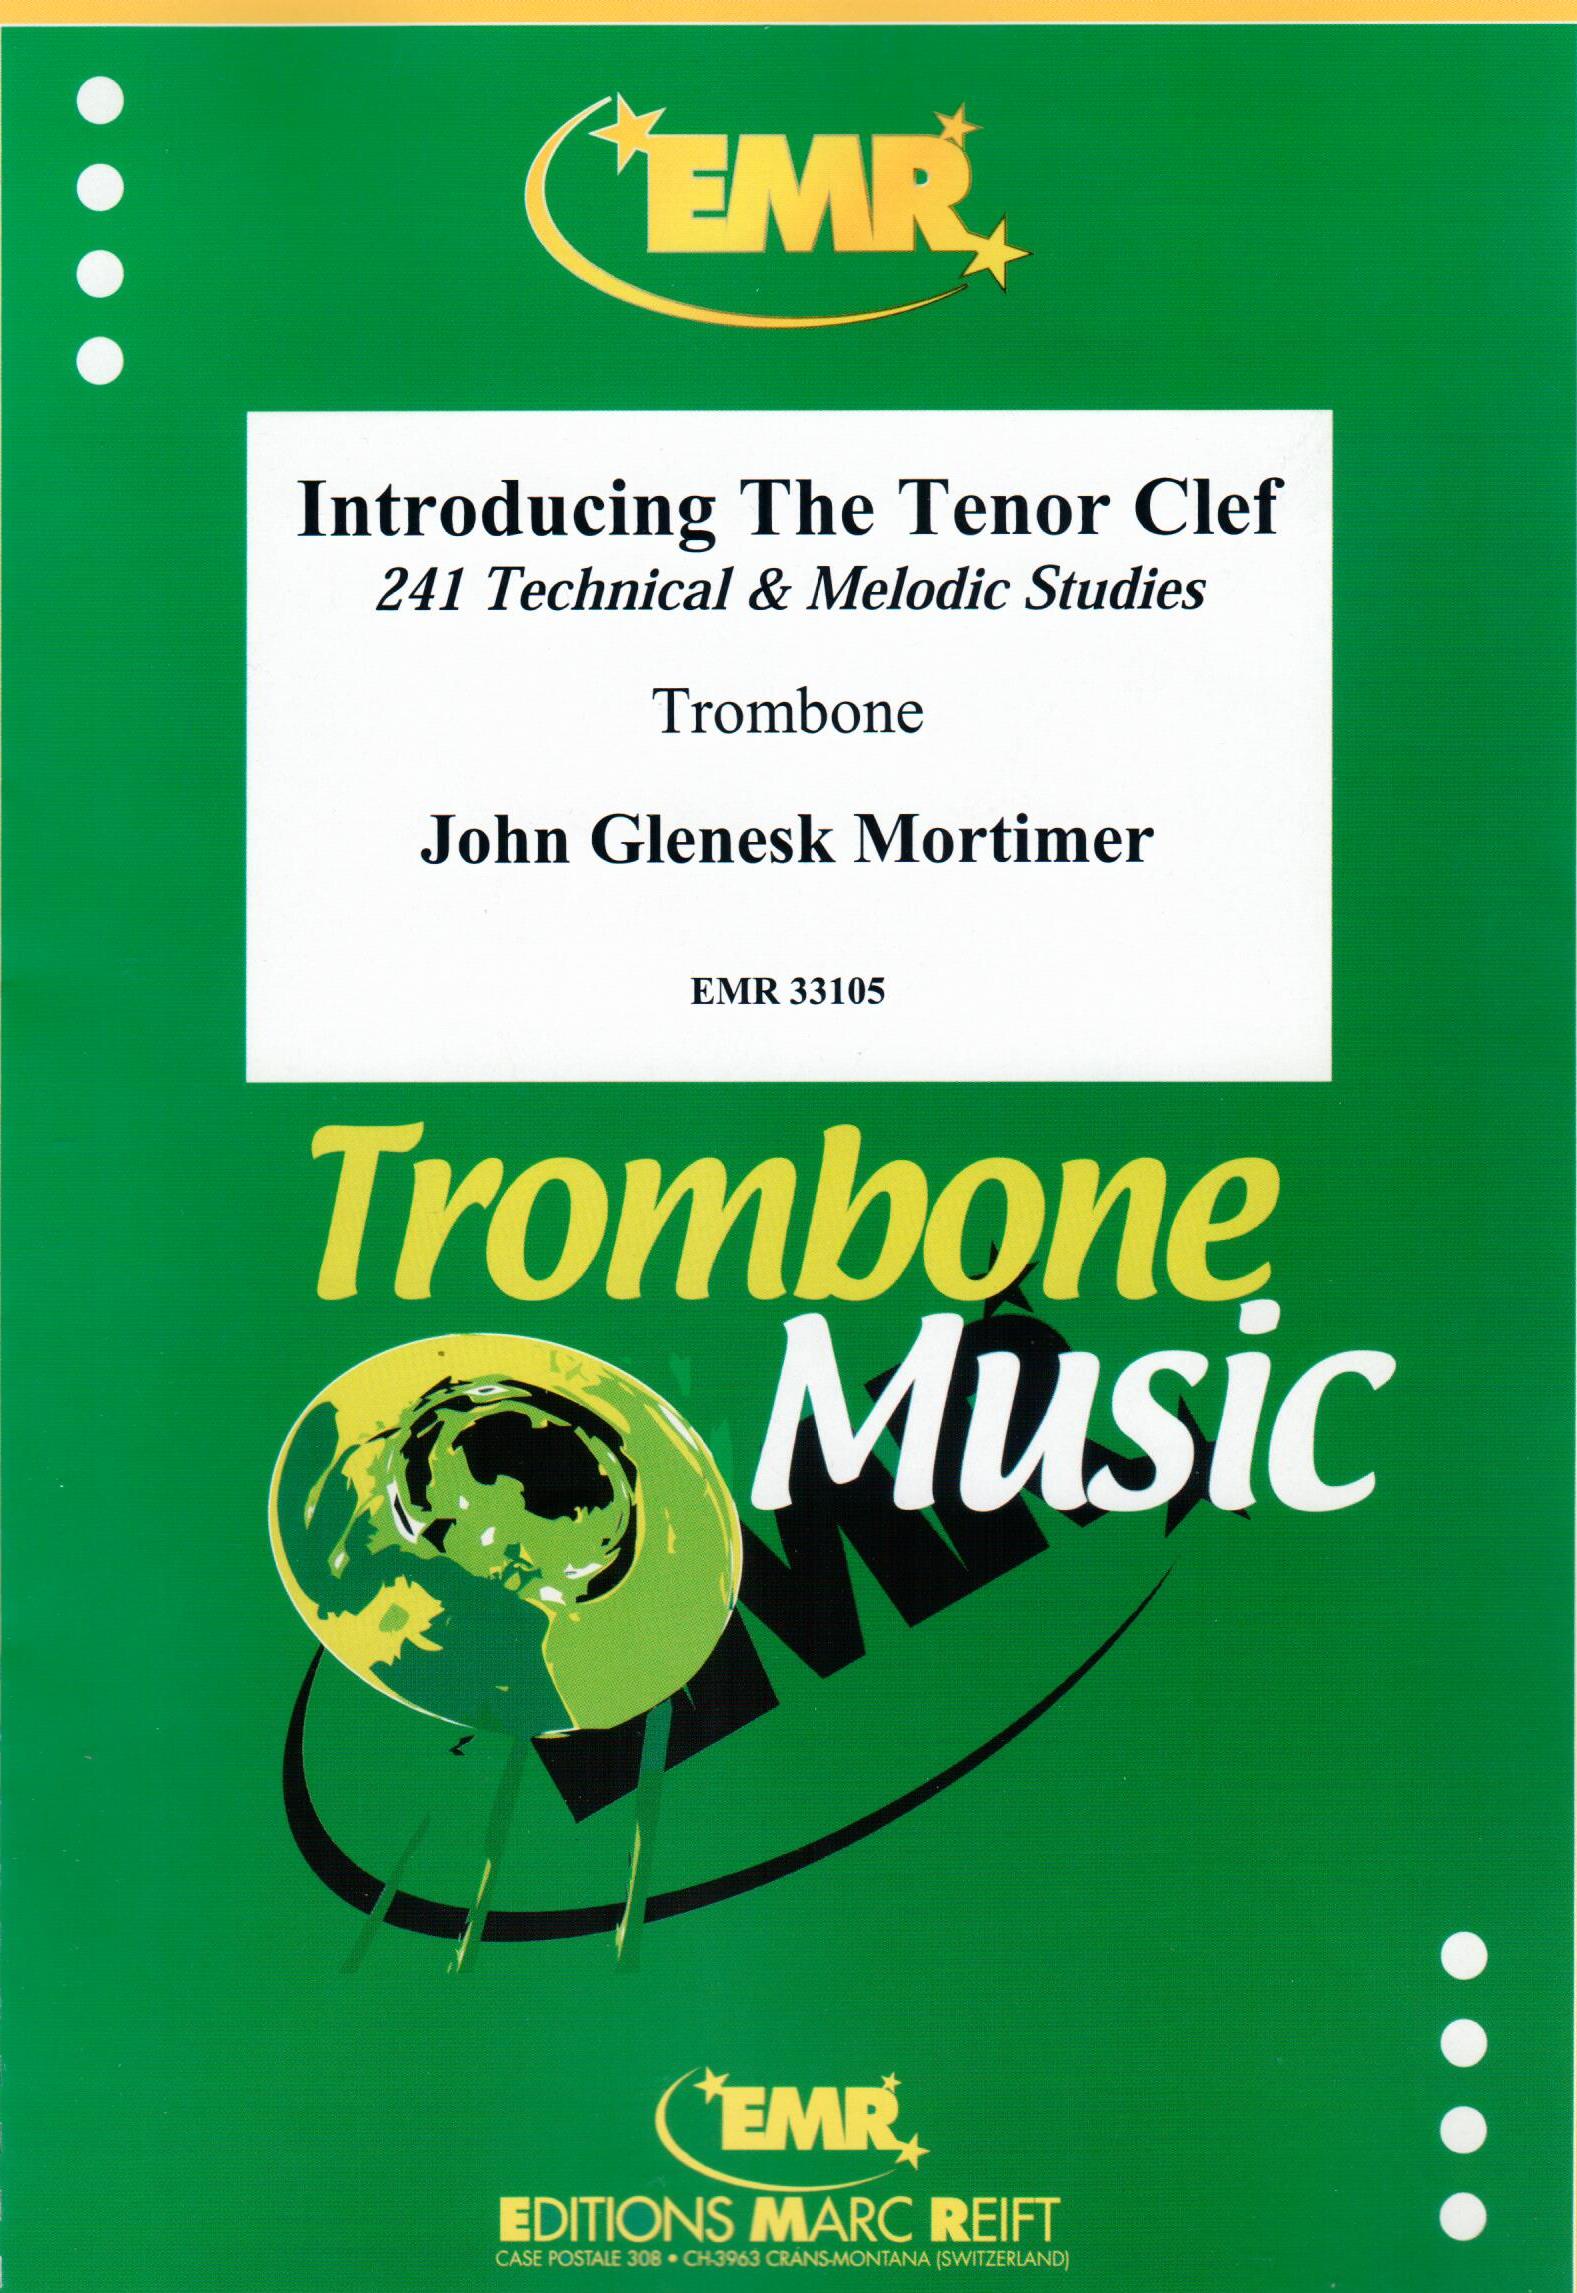 INTRODUCING THE TENOR CLEF, SOLOS - Trombone